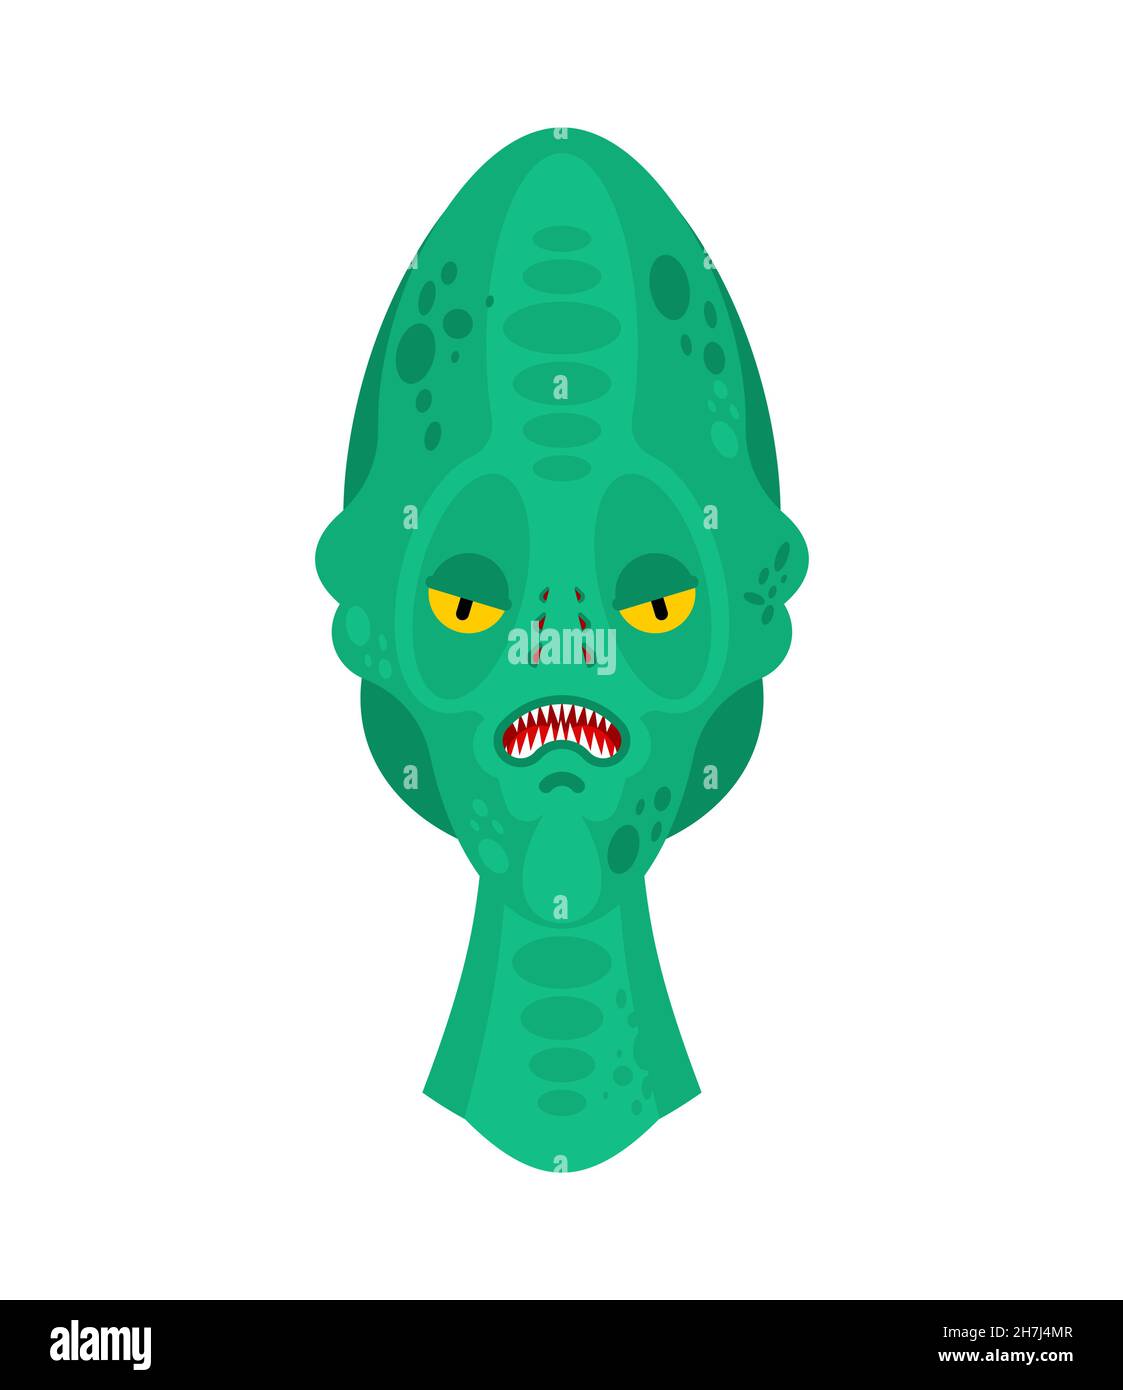 Reptilian face. Alien land invaders. Reptilian conspiracy theory. reptiloid humanoid beings from another planet with green skin. theory secret governm Stock Vector